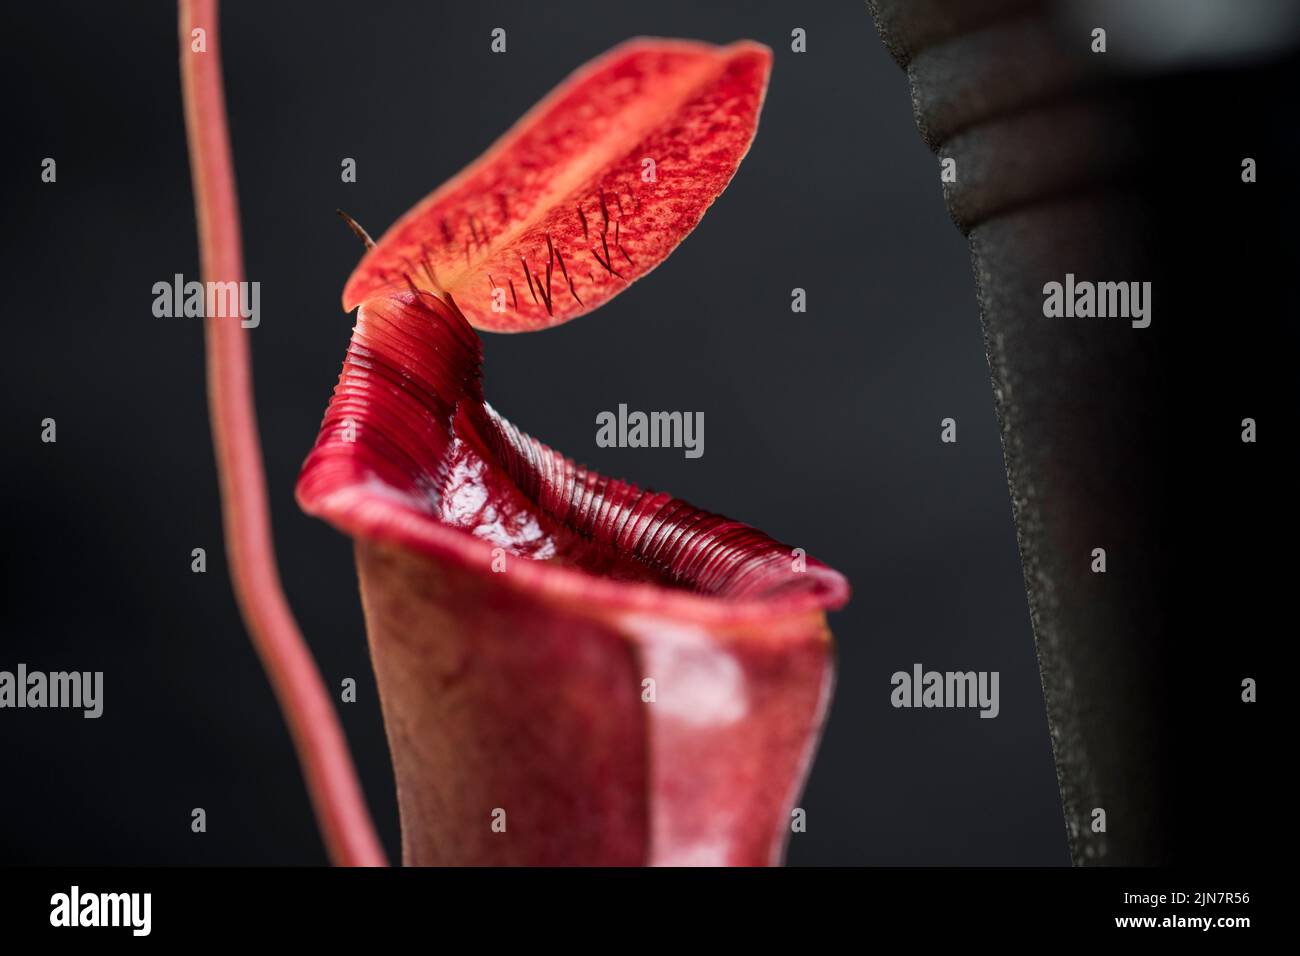 Pitcher plant close up red monkey cup leaves. Stock Photo